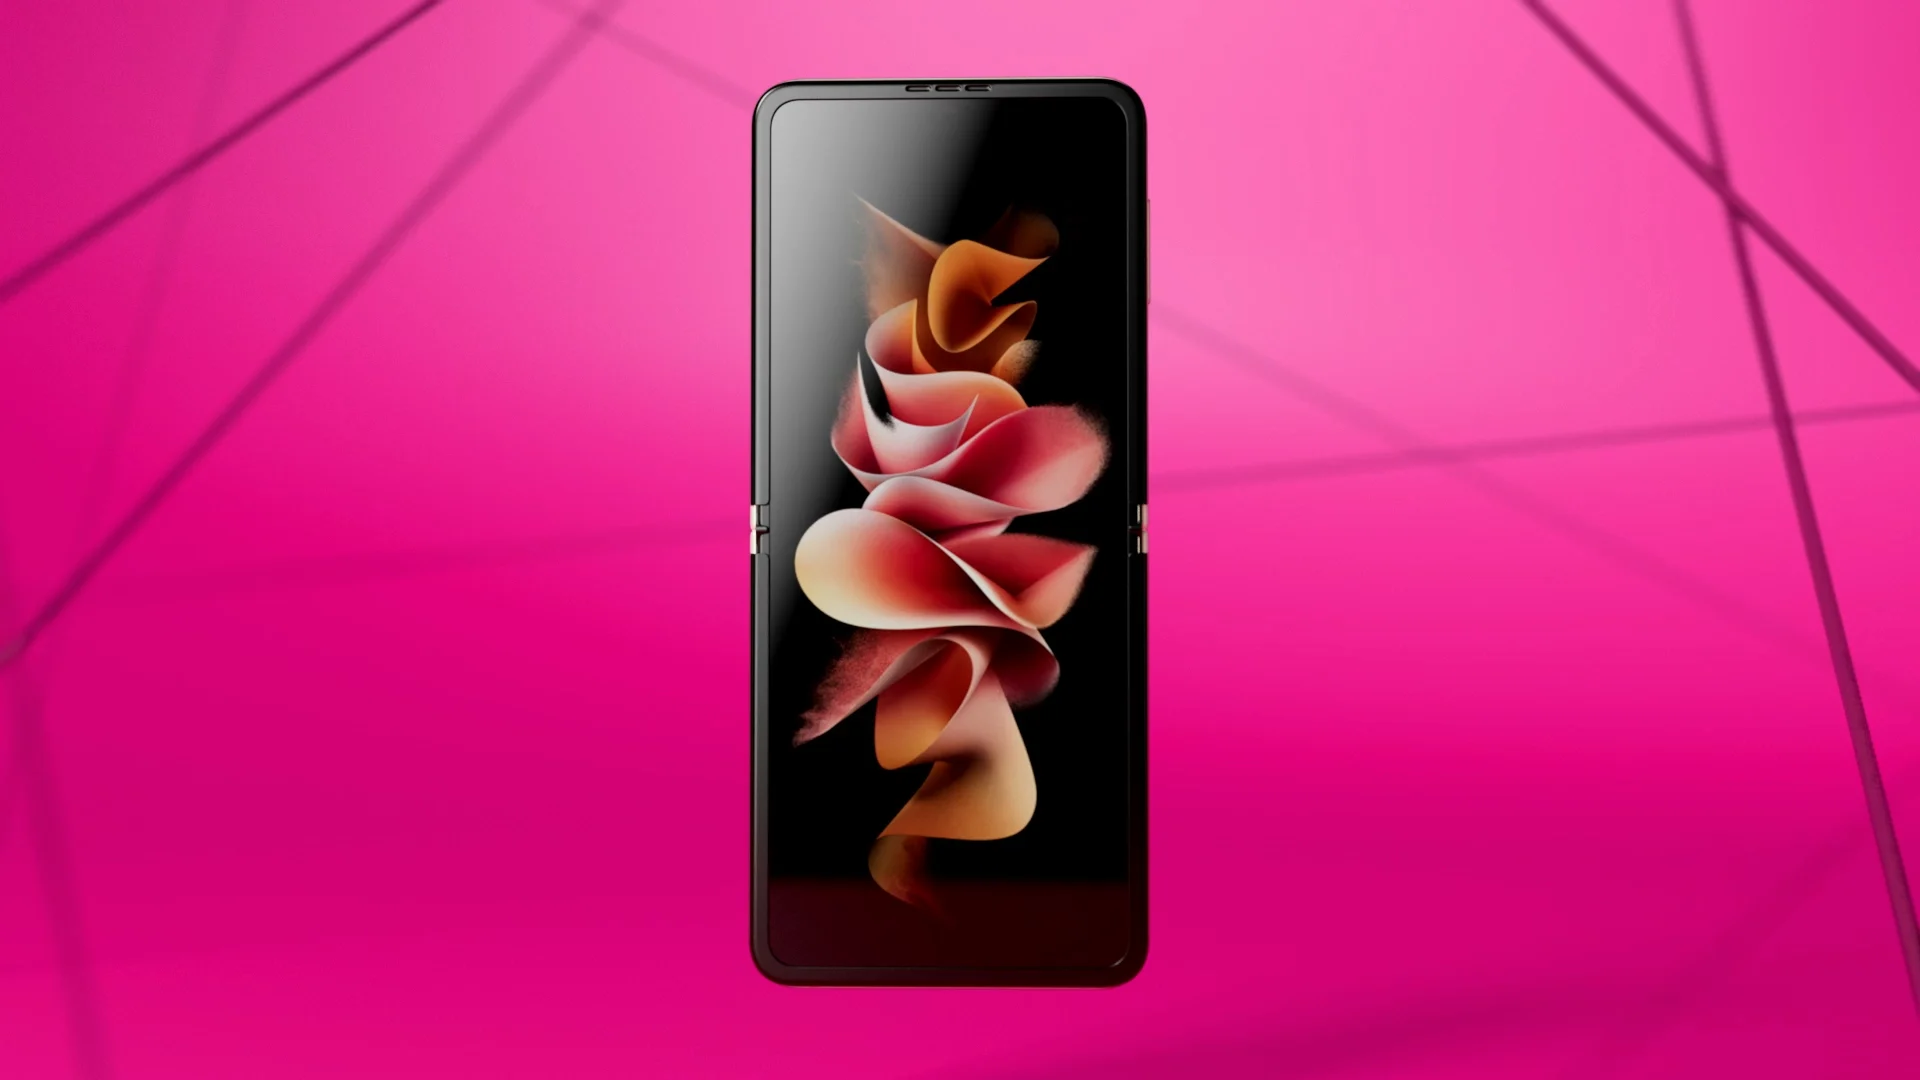 samsung smart phone with beautiful screen saver in front of an abstract magenta room